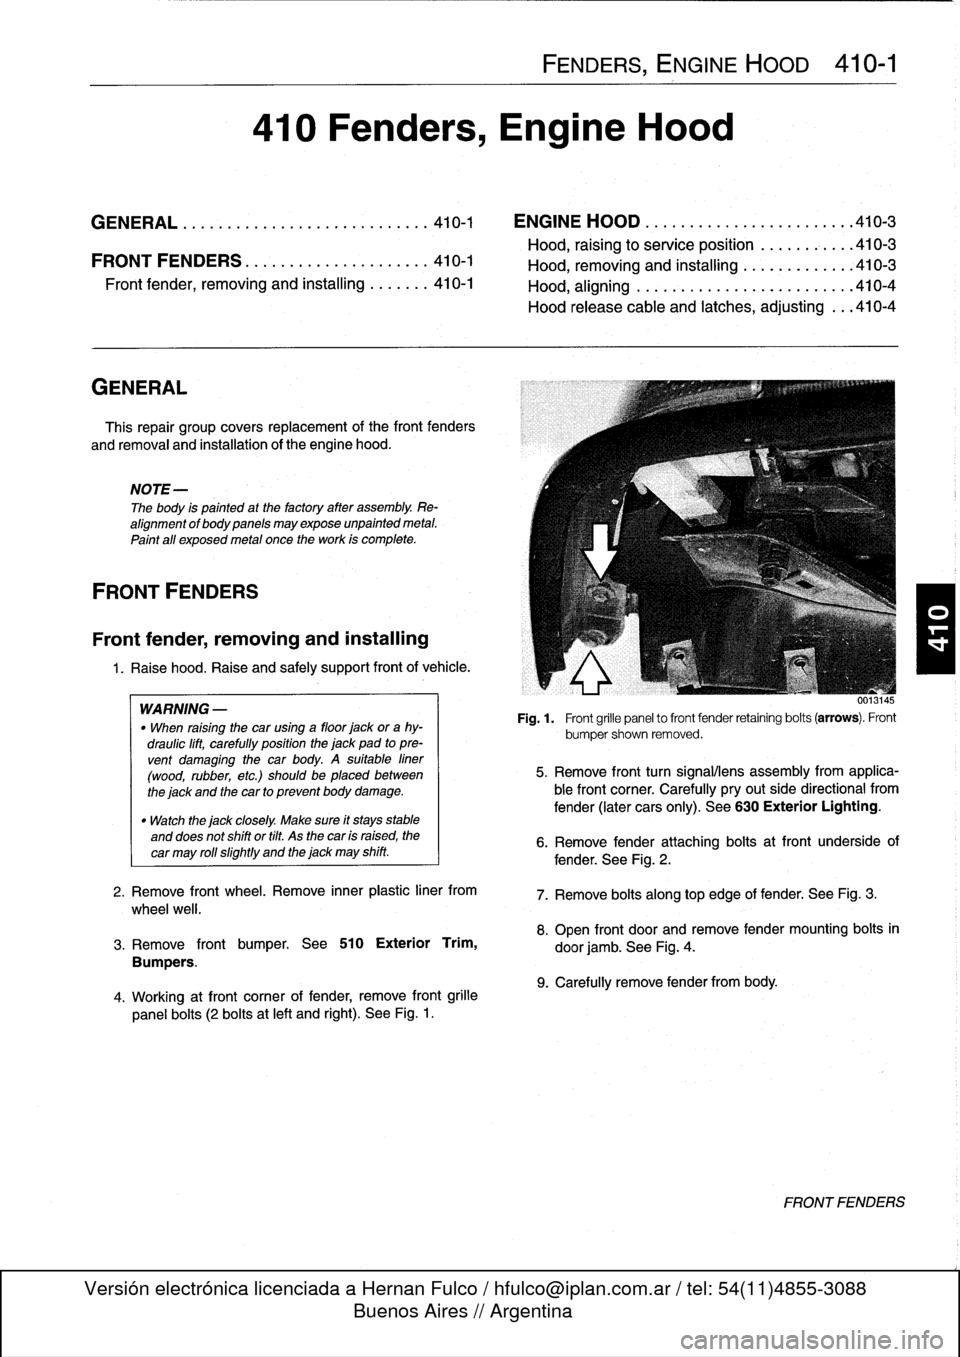 BMW 318i 1994 E36 Workshop Manual 
GENERAL

This
repair
group
covers
replacement
of
the
front
fenders

and
removal
and
installation
of
the
engine
hood
.

NOTE-

The
body
is
painted
at
the
factoryafter
assembly
.
Re-
alignment
of
body
